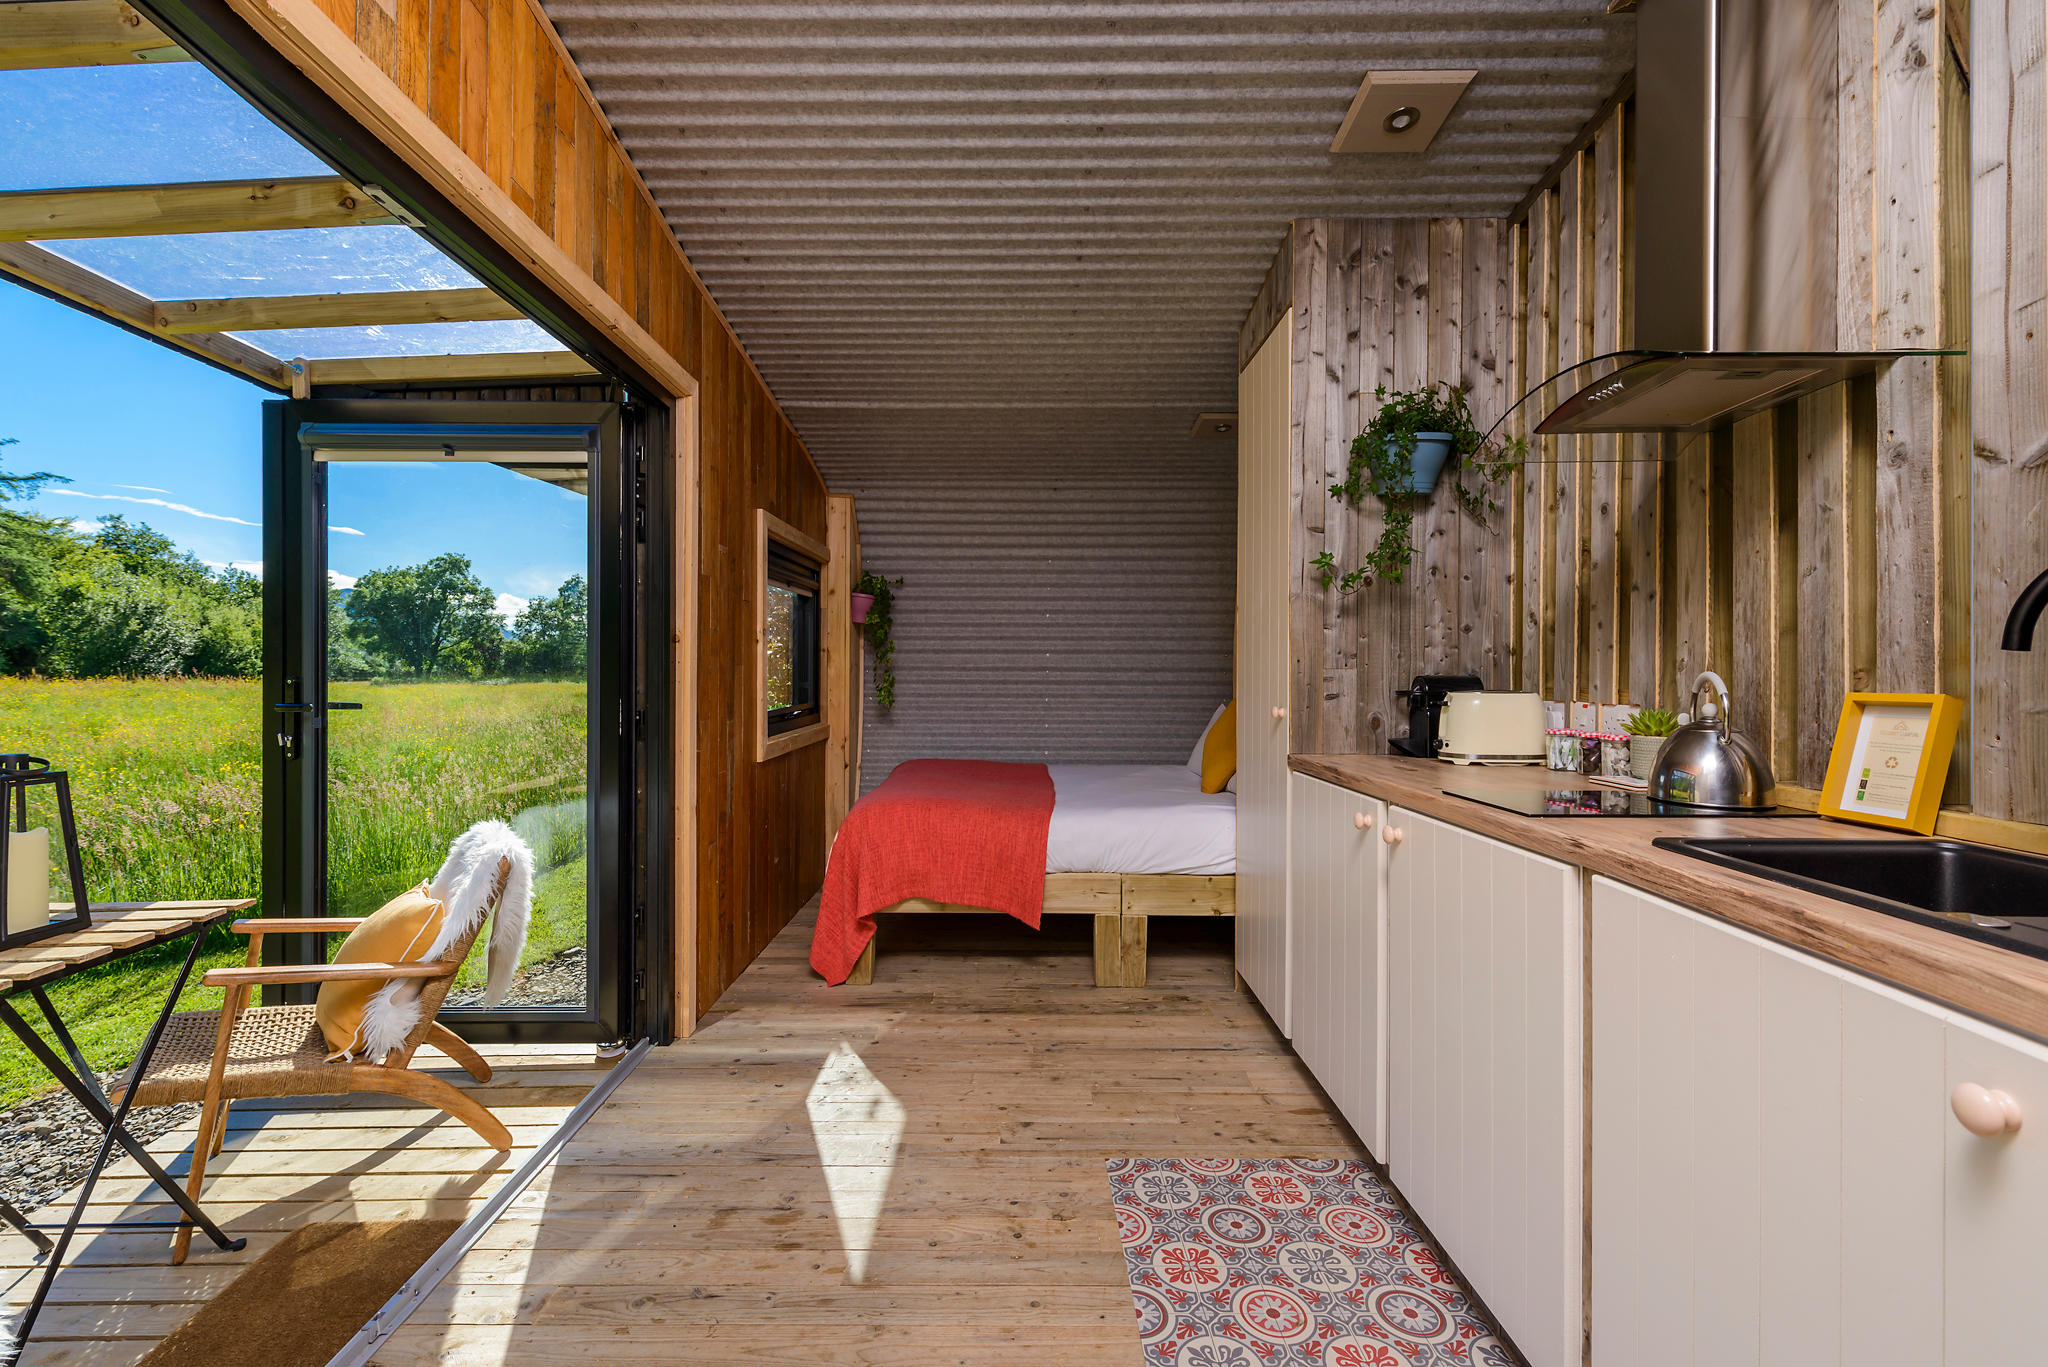 The Cabin interior boasts a King Size Bed, central heating, kitchenette with fridge to Nespresso mac Killarney Glamping At The Grove Kerry 087 975 0110